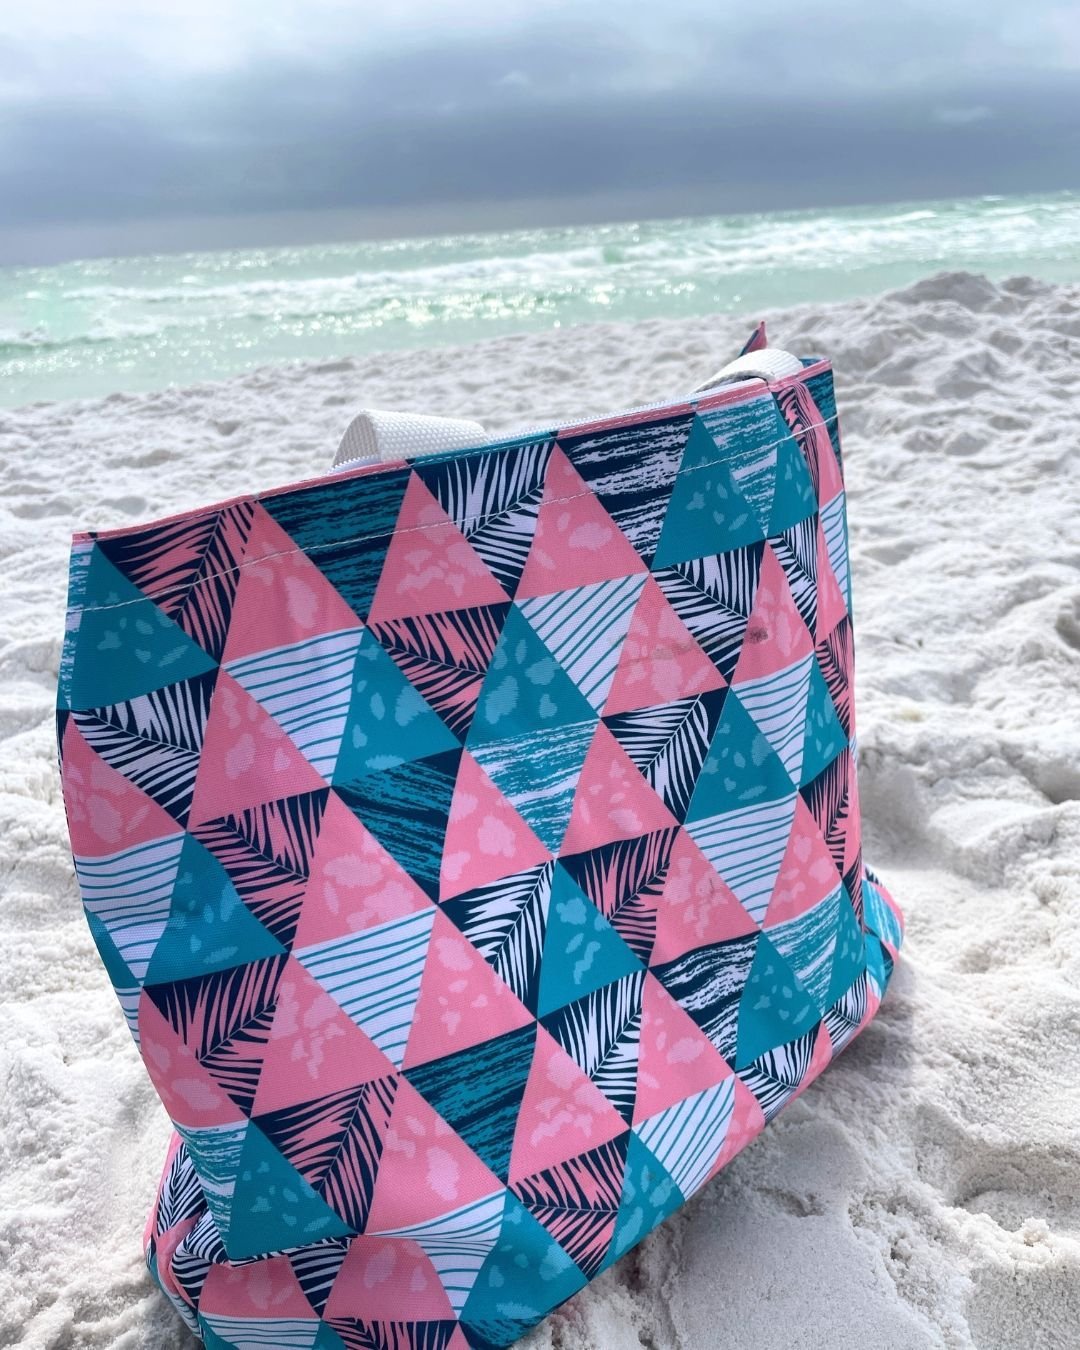 Looking for the ultimate summer accessory? Our lightweight and packable beach tote is perfect for the pool, beach, and travel. Made from recycled polyester, this eco-friendly tote can be fully customized on the outside to match your style. Inside, yo